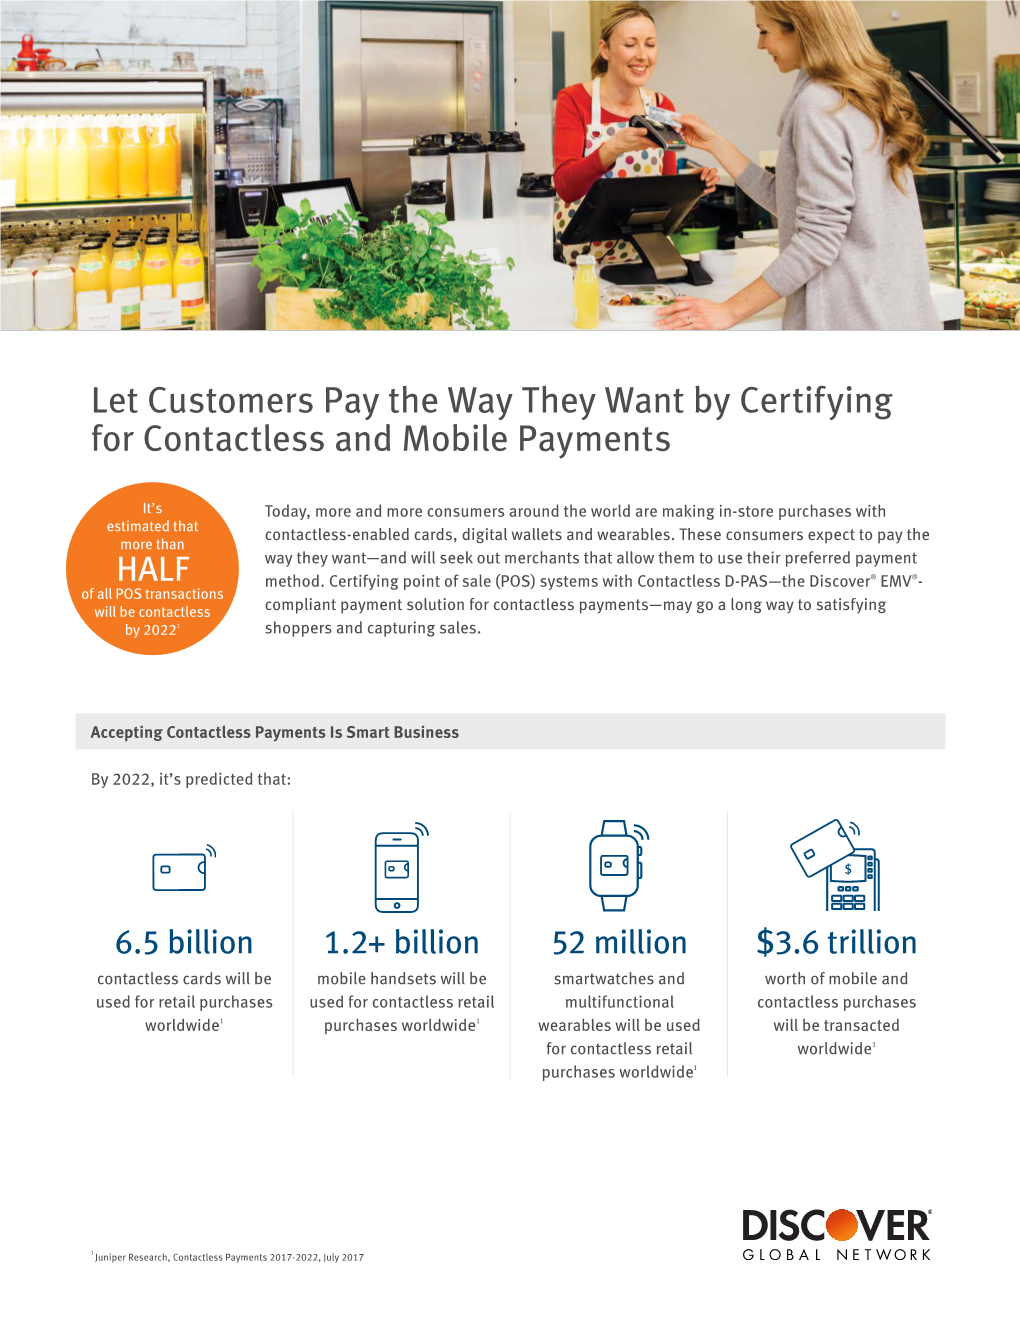 Let Customers Pay the Way They Want by Certifying for Contactless and Mobile Payments